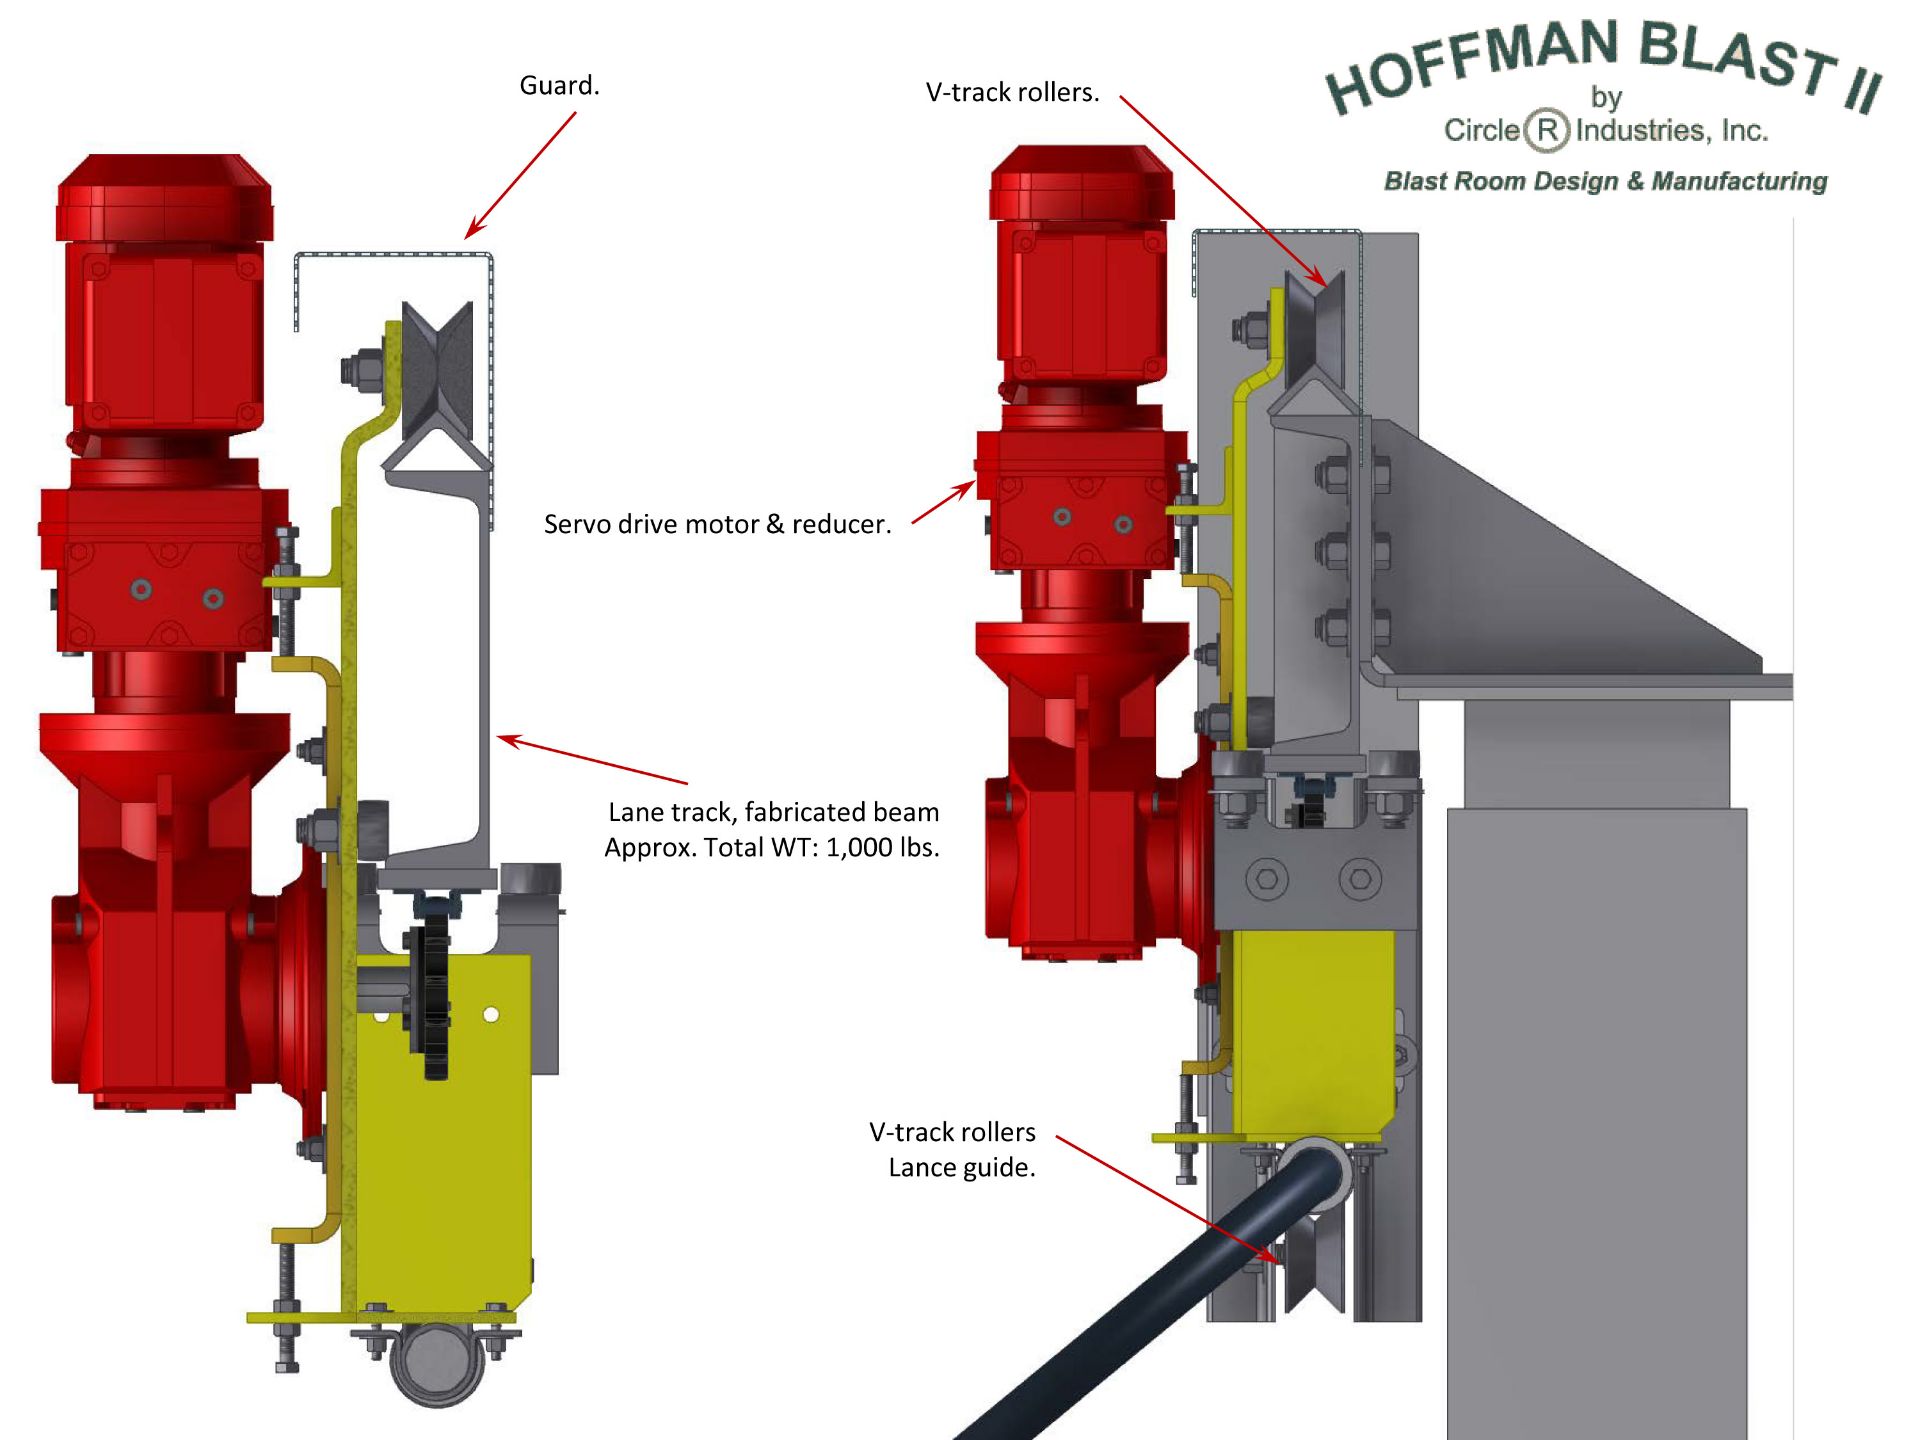 Complete Hoffman Blast II Line semi-automated system Prececo line (contains lots 160, 161, 162) - Image 9 of 14